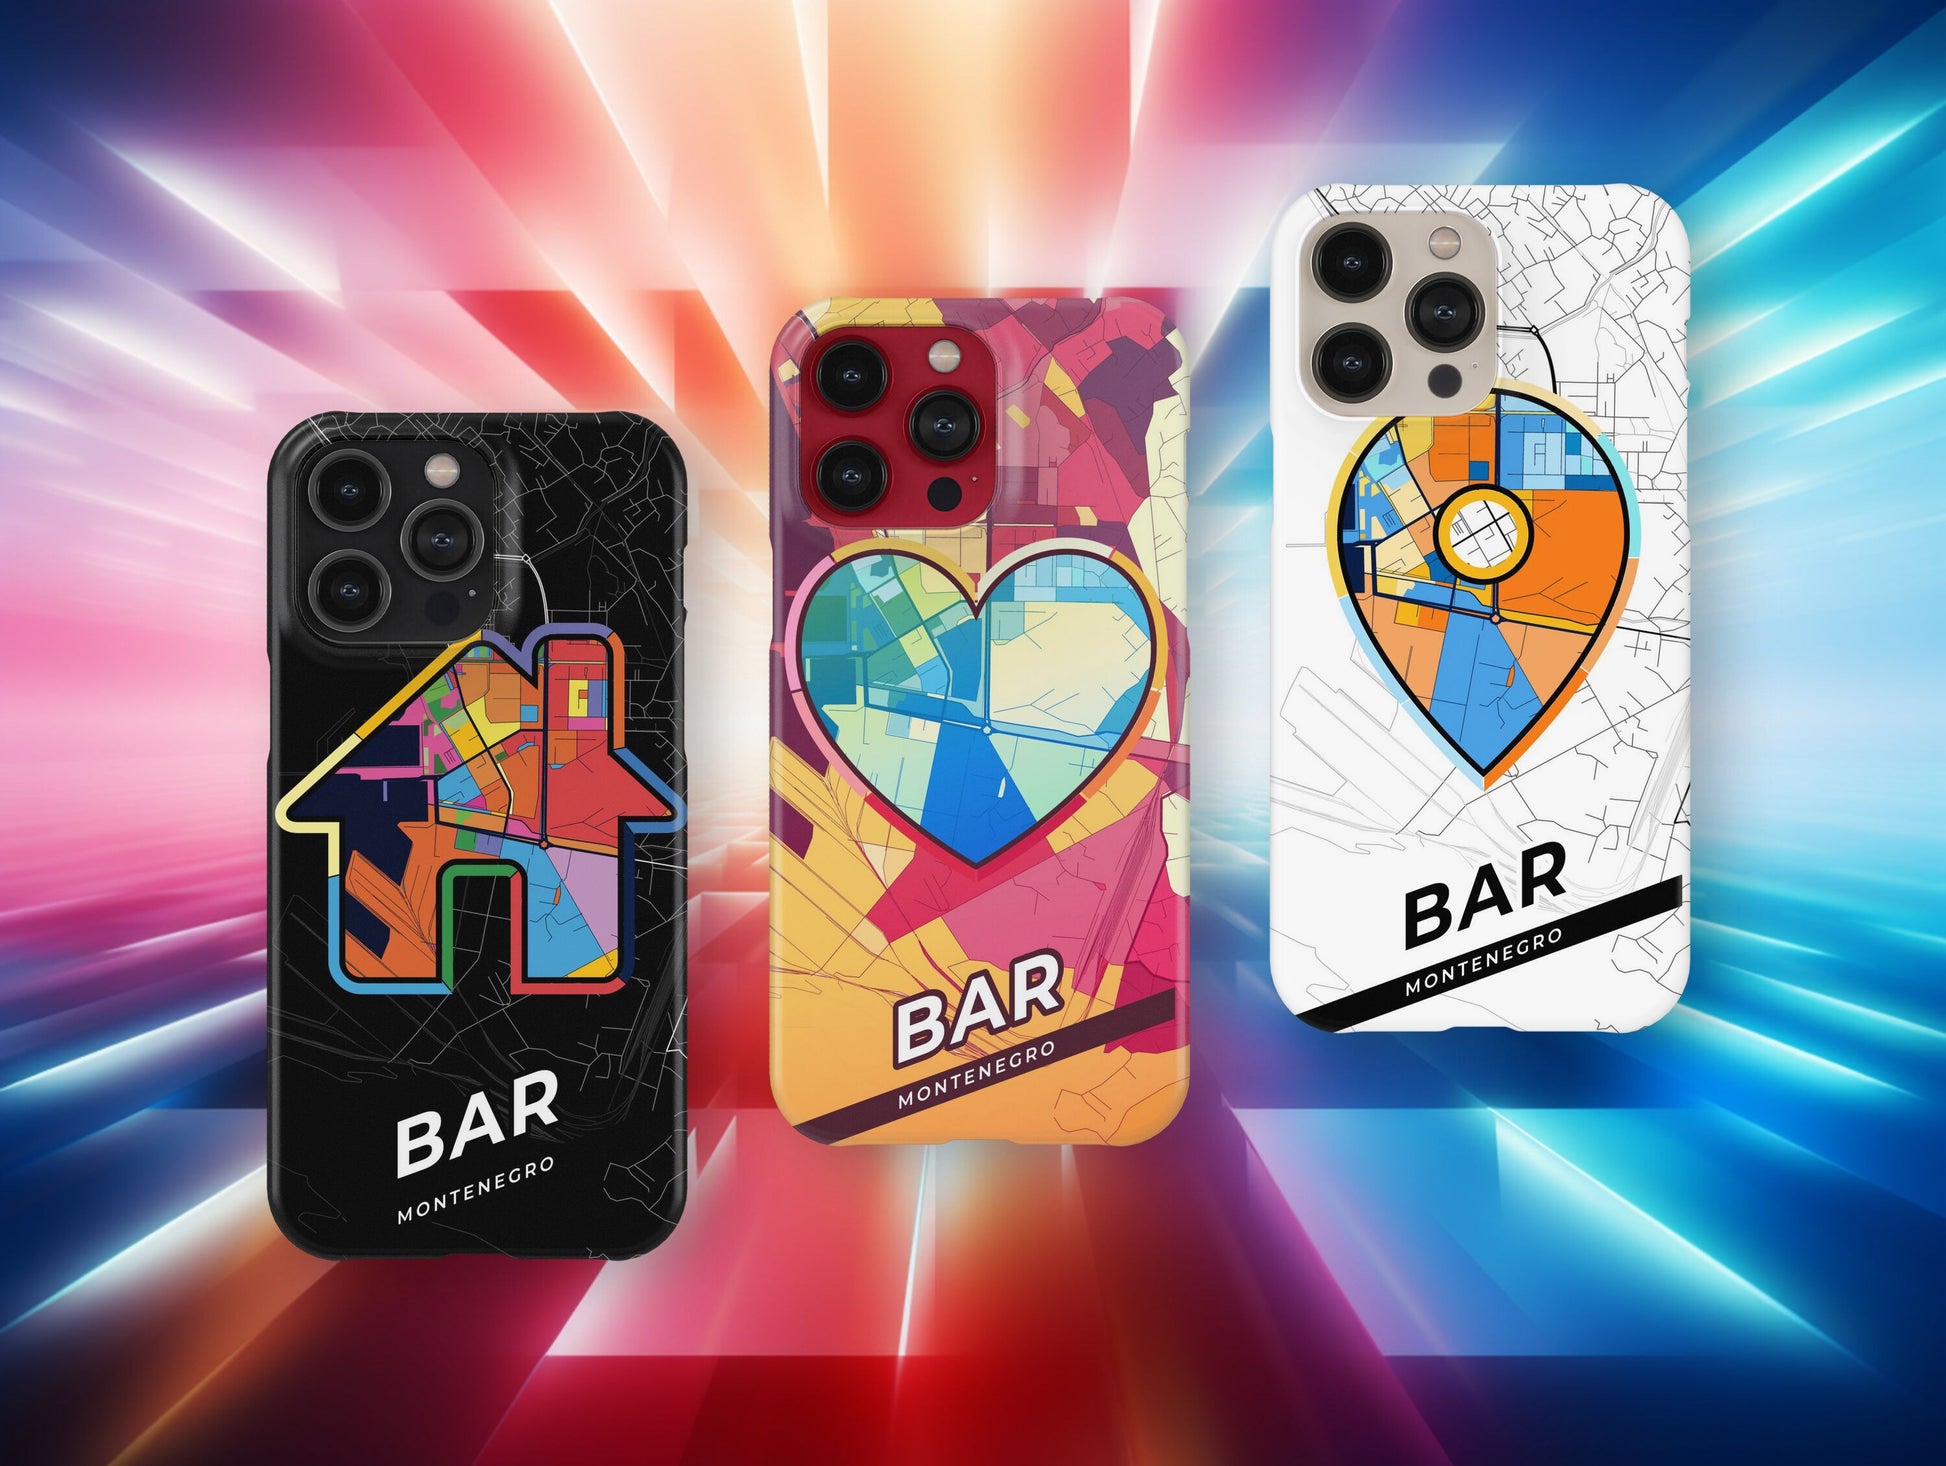 Bar Montenegro slim phone case with colorful icon. Birthday, wedding or housewarming gift. Couple match cases.